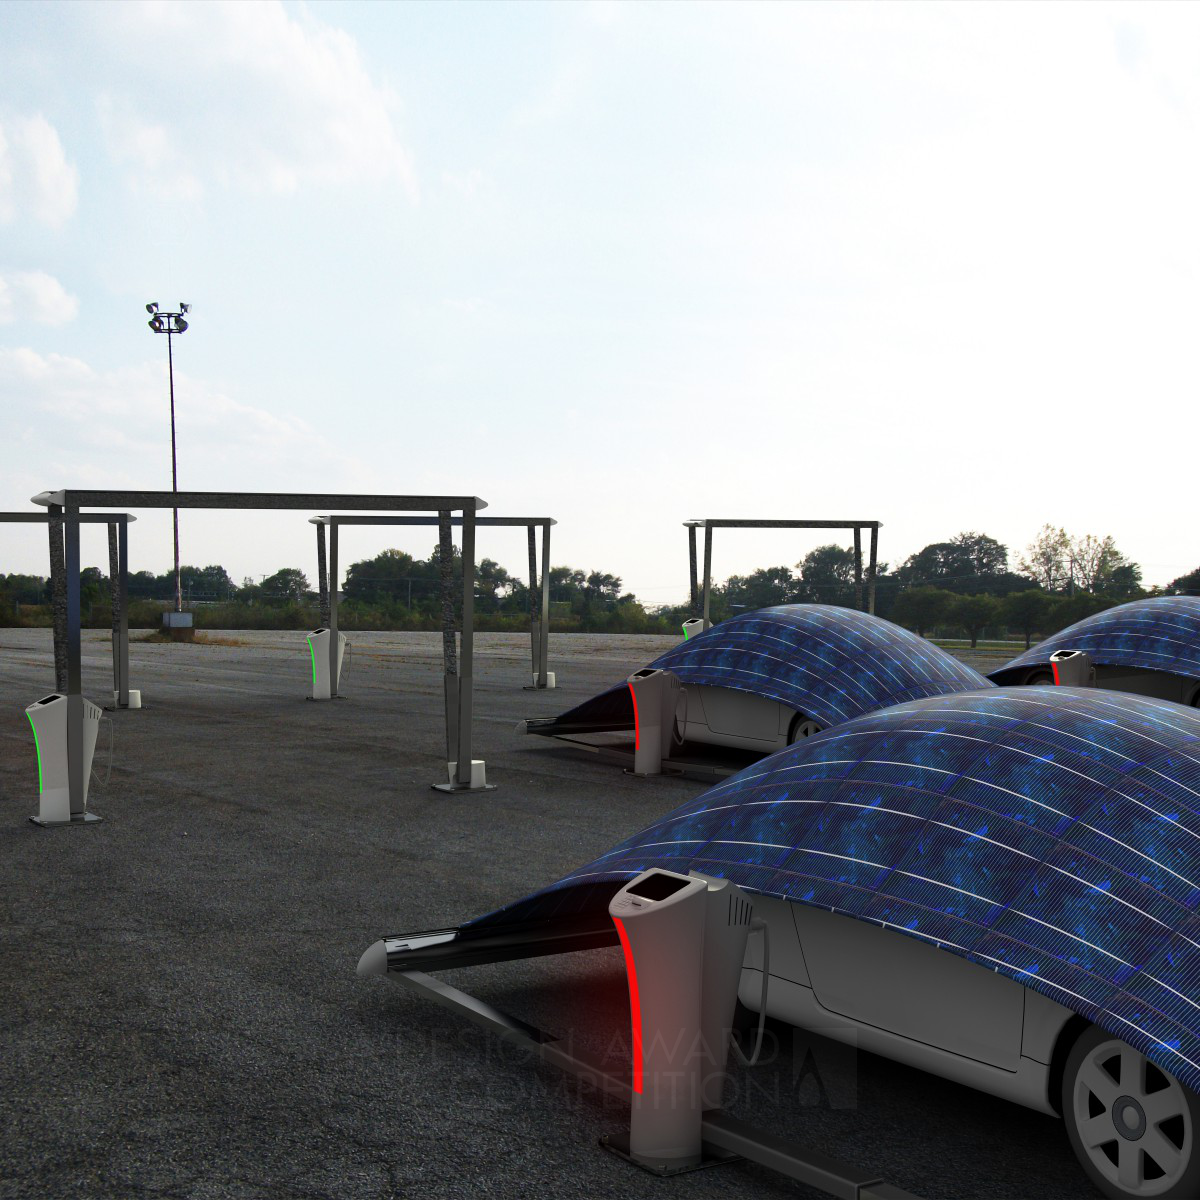 V-Tent Car Charging and Protection Unit by Hakan Gürsu Silver Energy Products, Projects and Devices Design Award Winner 2013 